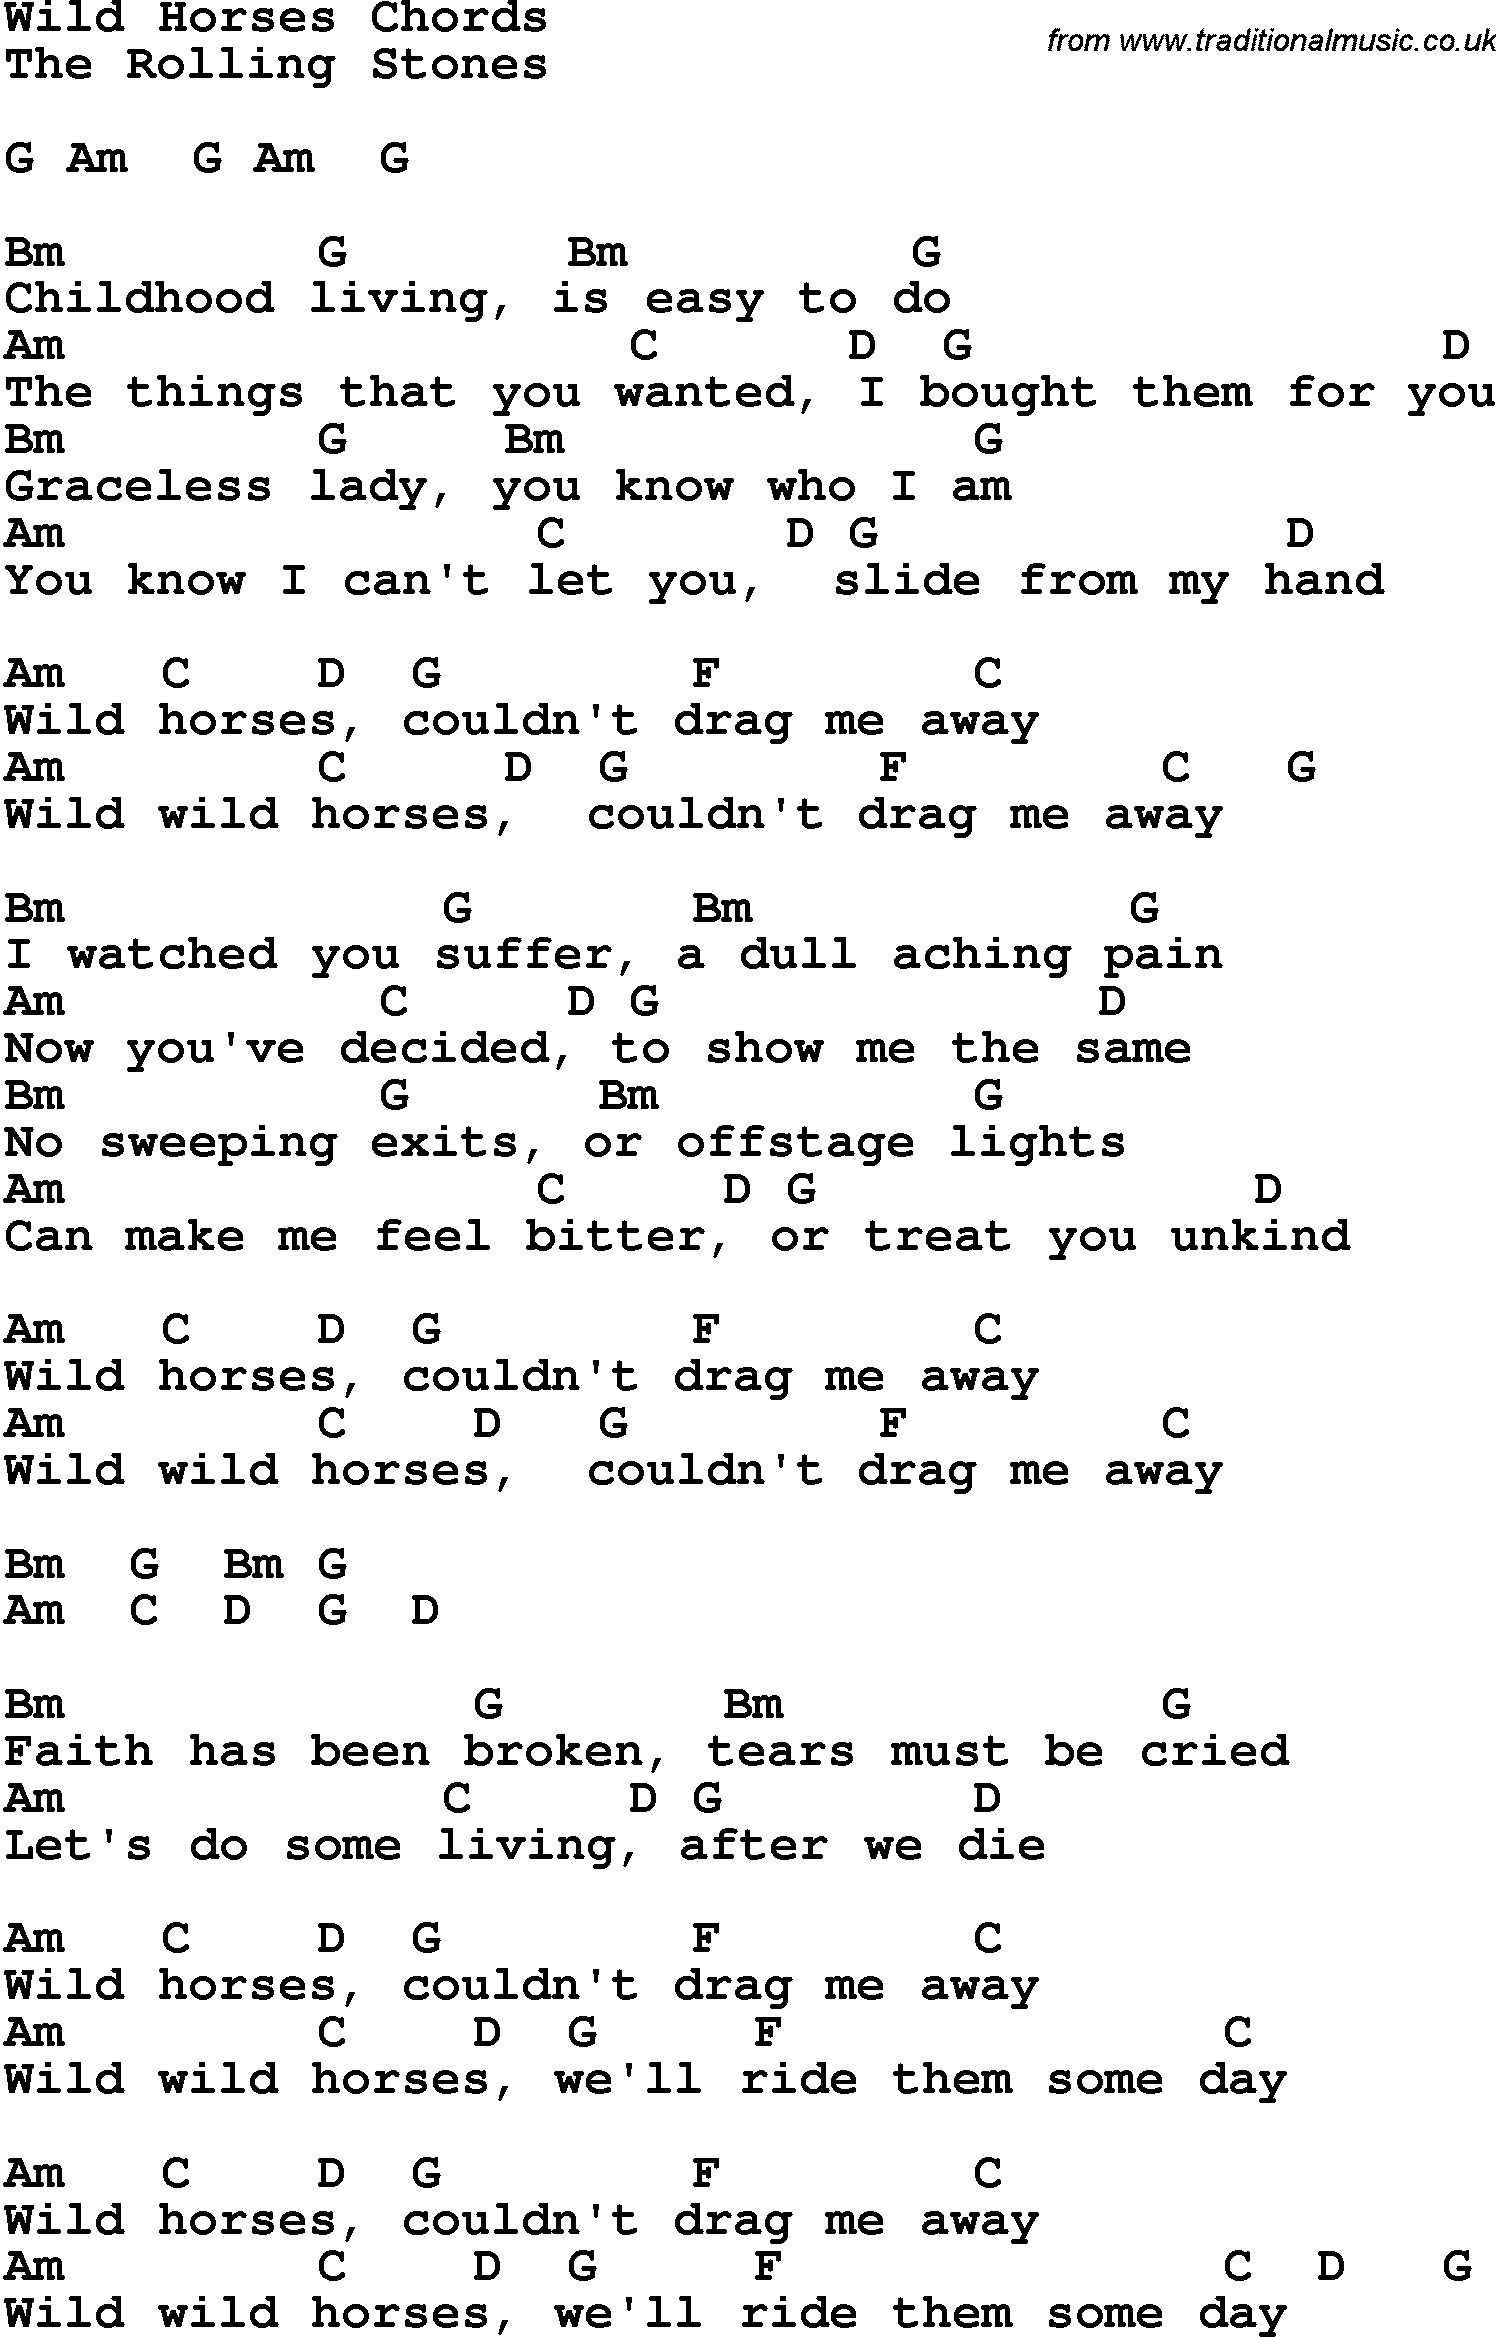 Song Lyrics with guitar chords for Wild Horses